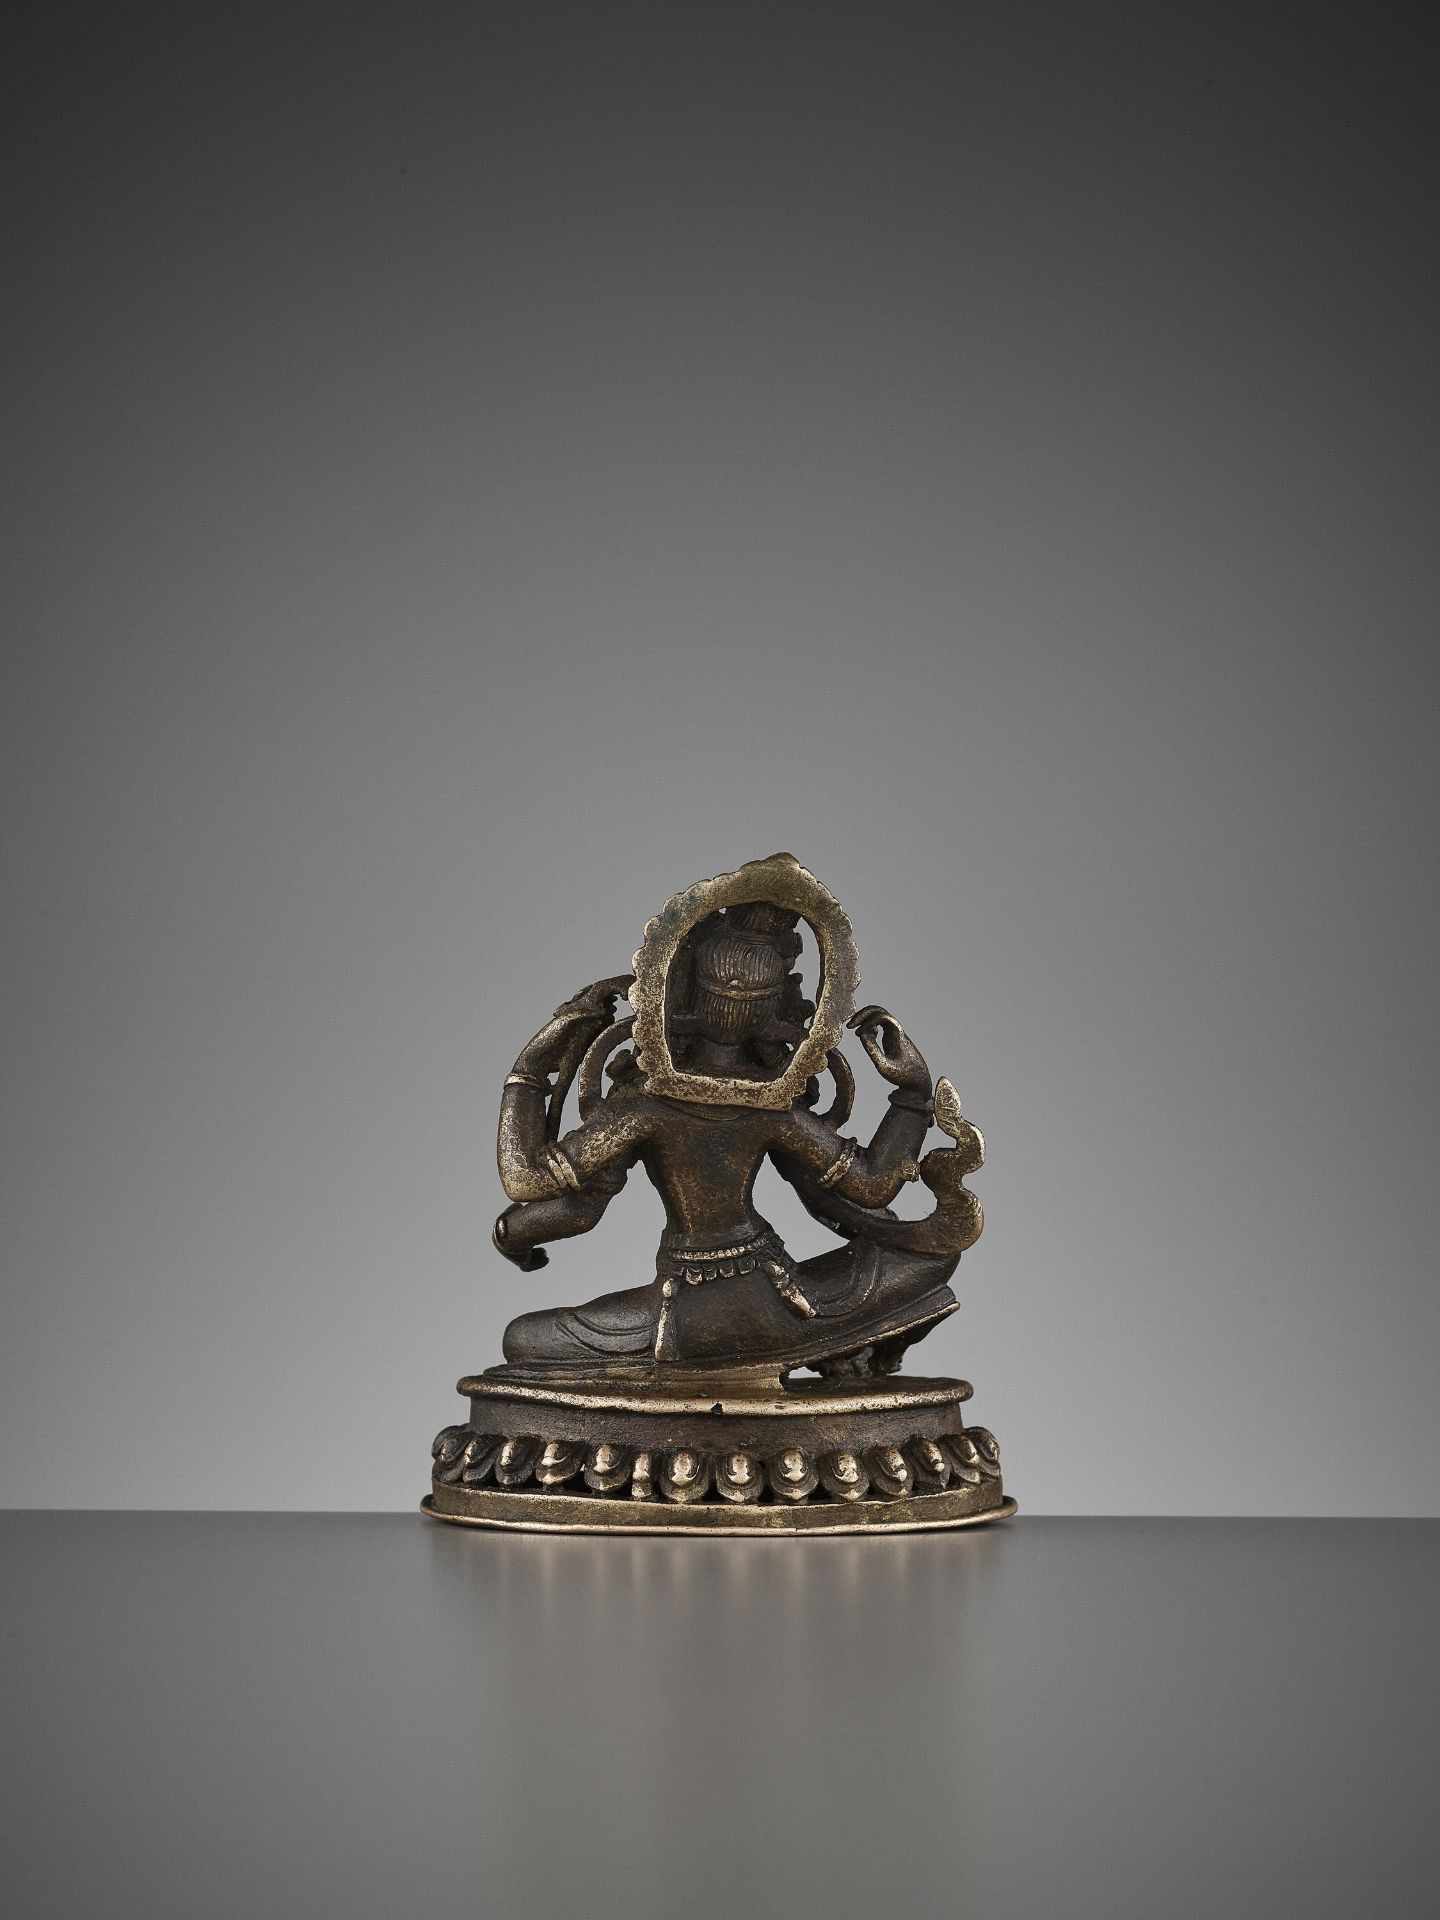 A SMALL BRONZE OF THE FOUR-ARMED AVALOKITESVARA, 15TH-16TH CENTURY - Image 6 of 11